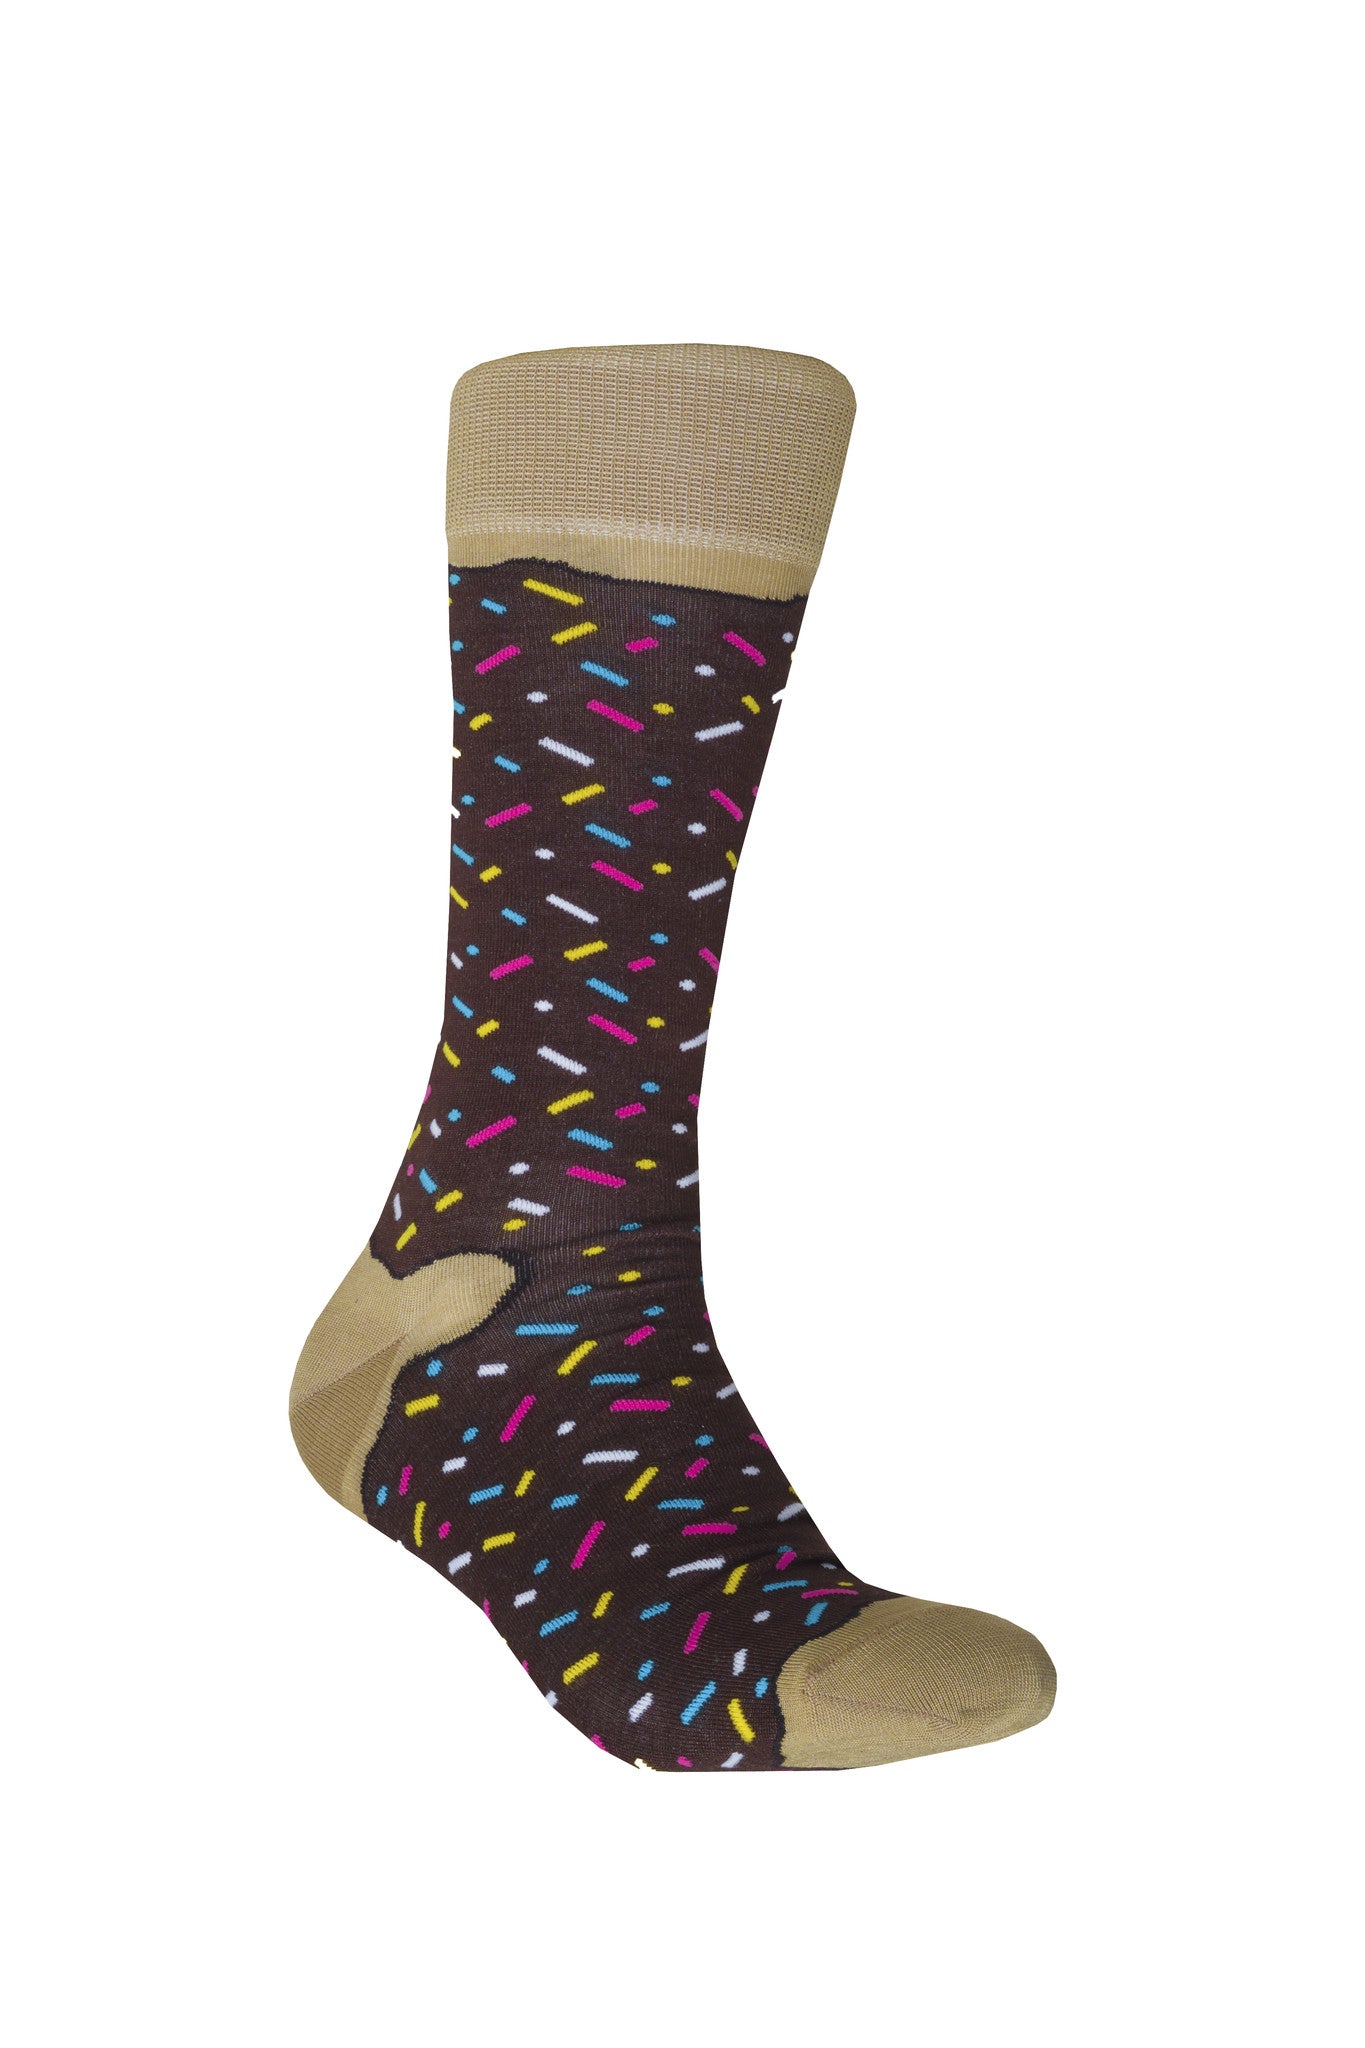 giraffecool-giraffe-cool-brand-chocolate-donut-brown-light-cream-and-colour-sparkles-Mercerized-And-Brushed-Cotton-Fashion-Socks-Front